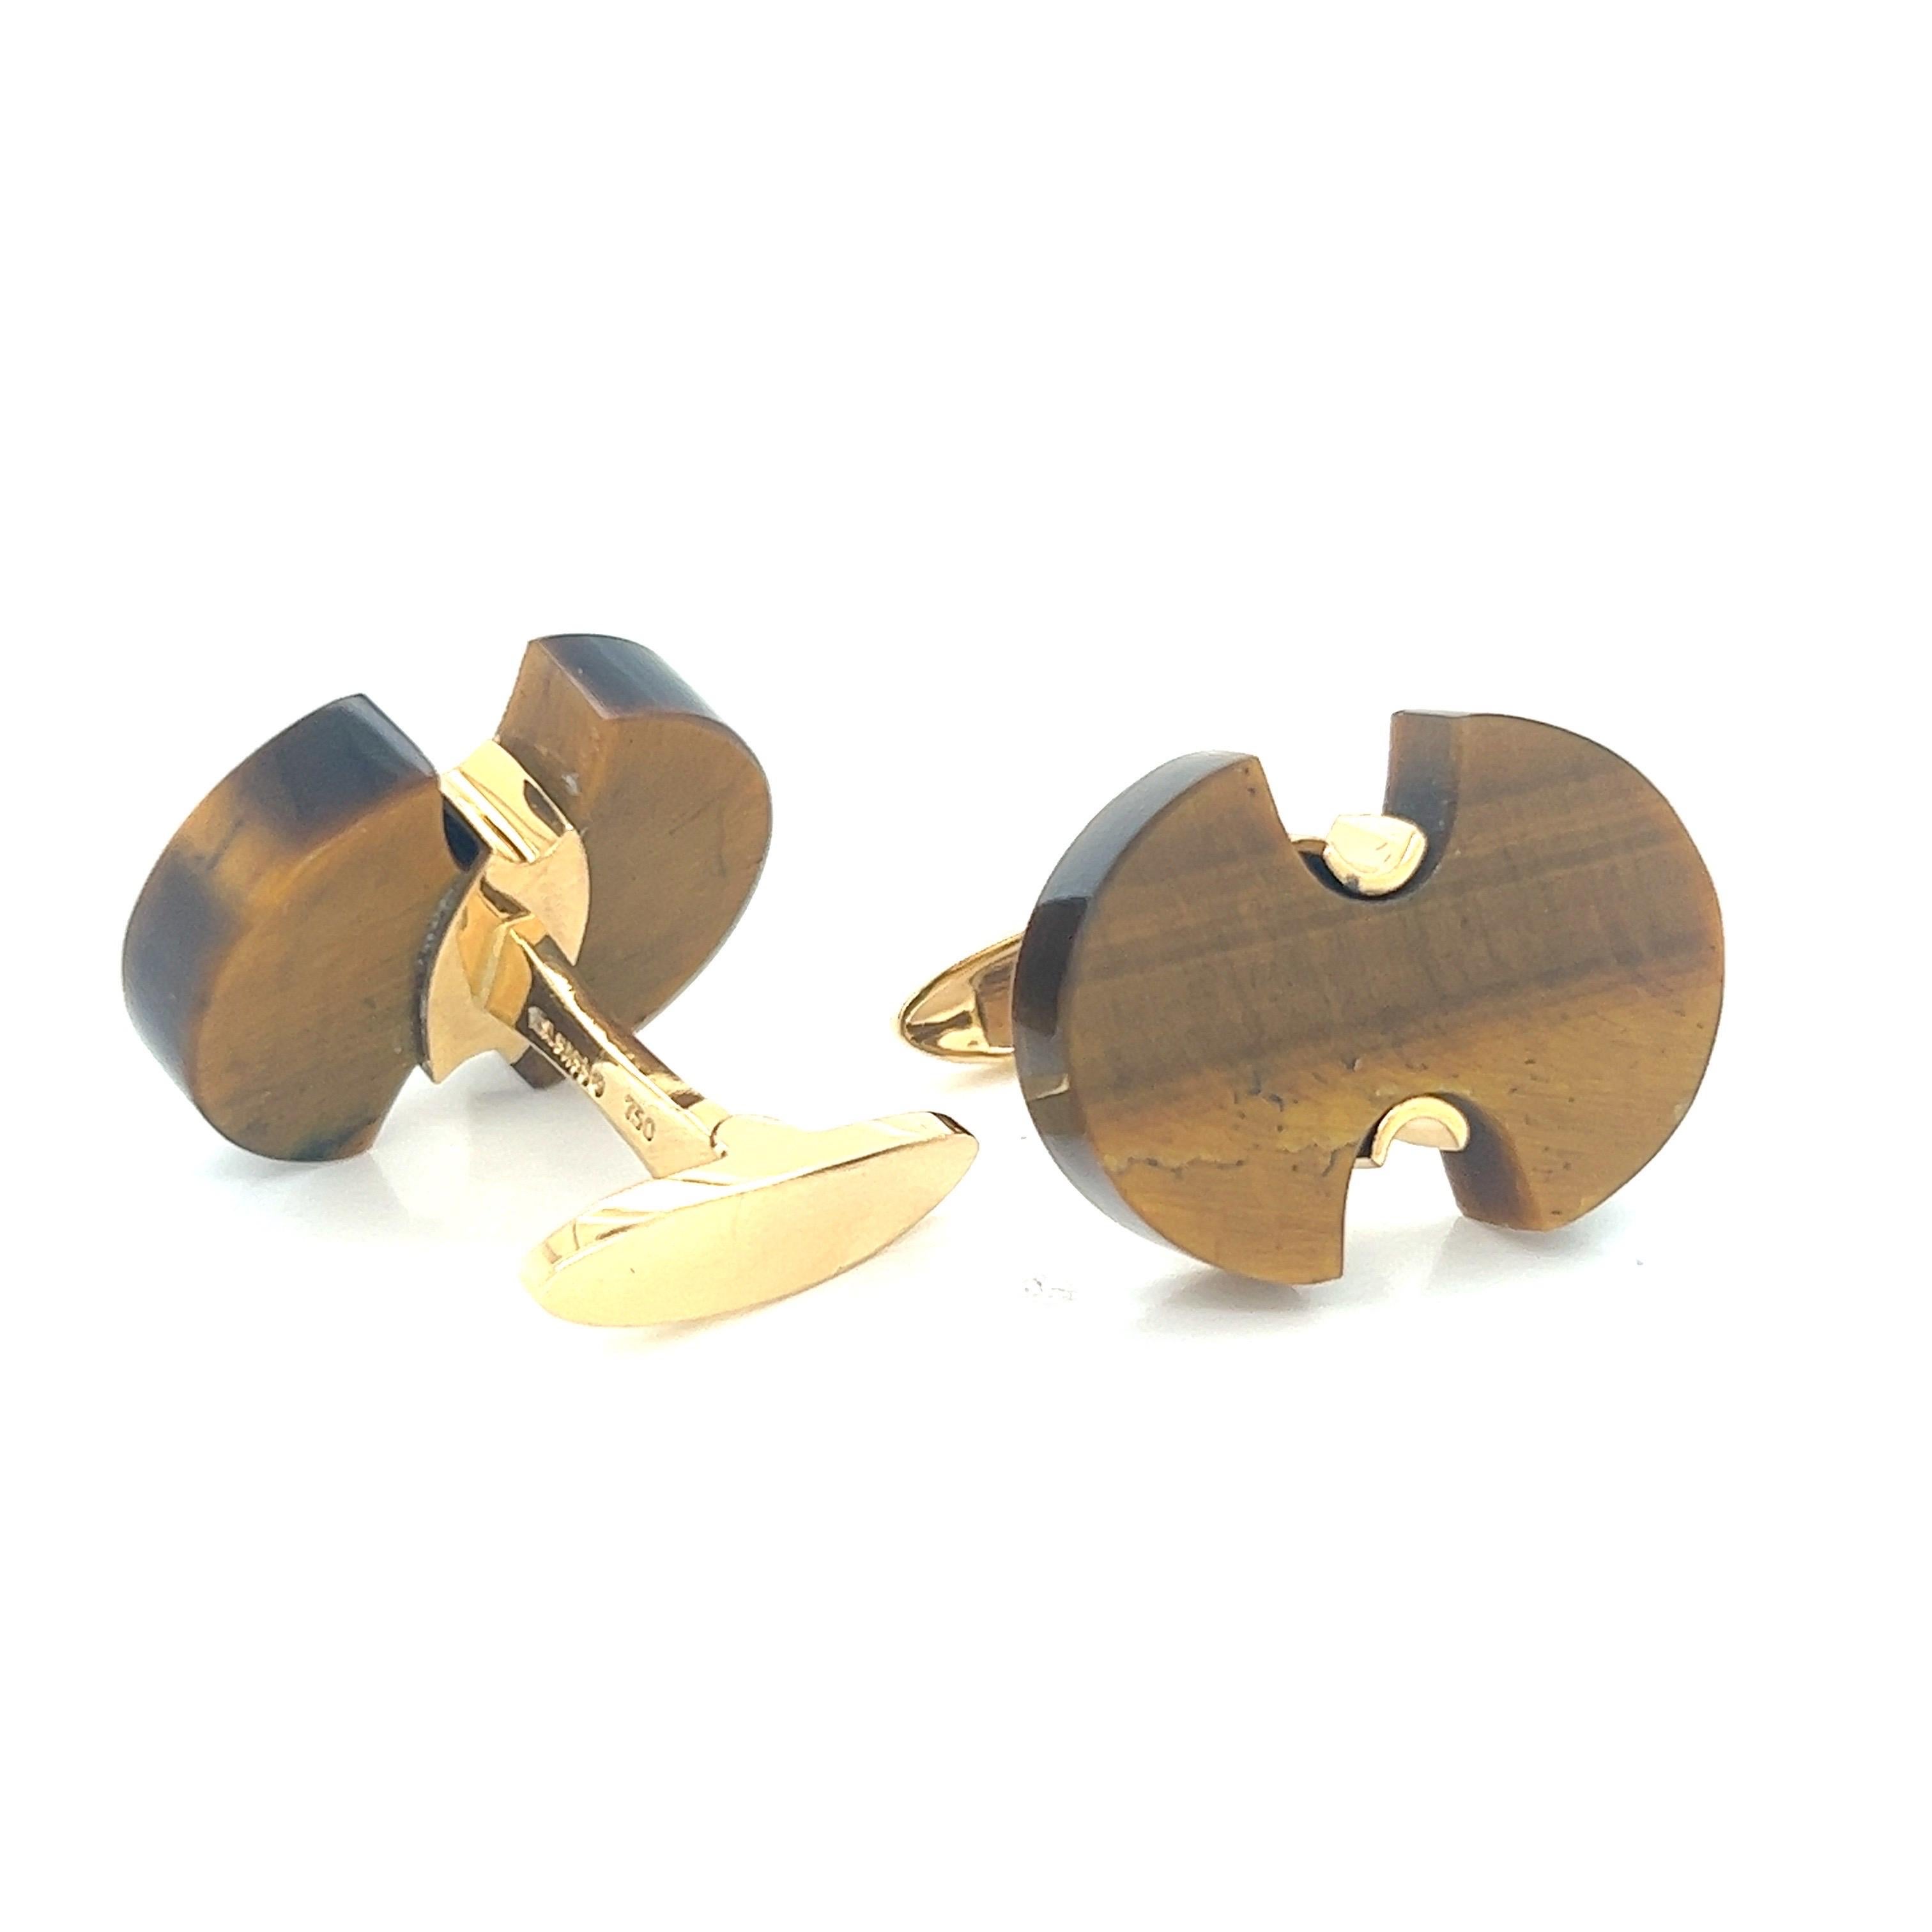 Designed by the renowned designer Lois D. Sasson, these 14k yellow gold cufflinks with a hand-cut tiger eye top showcase a harmonious blend of elegance and natural beauty.
The cufflinks feature a carefully hand-cut tiger eye gemstone, known for its